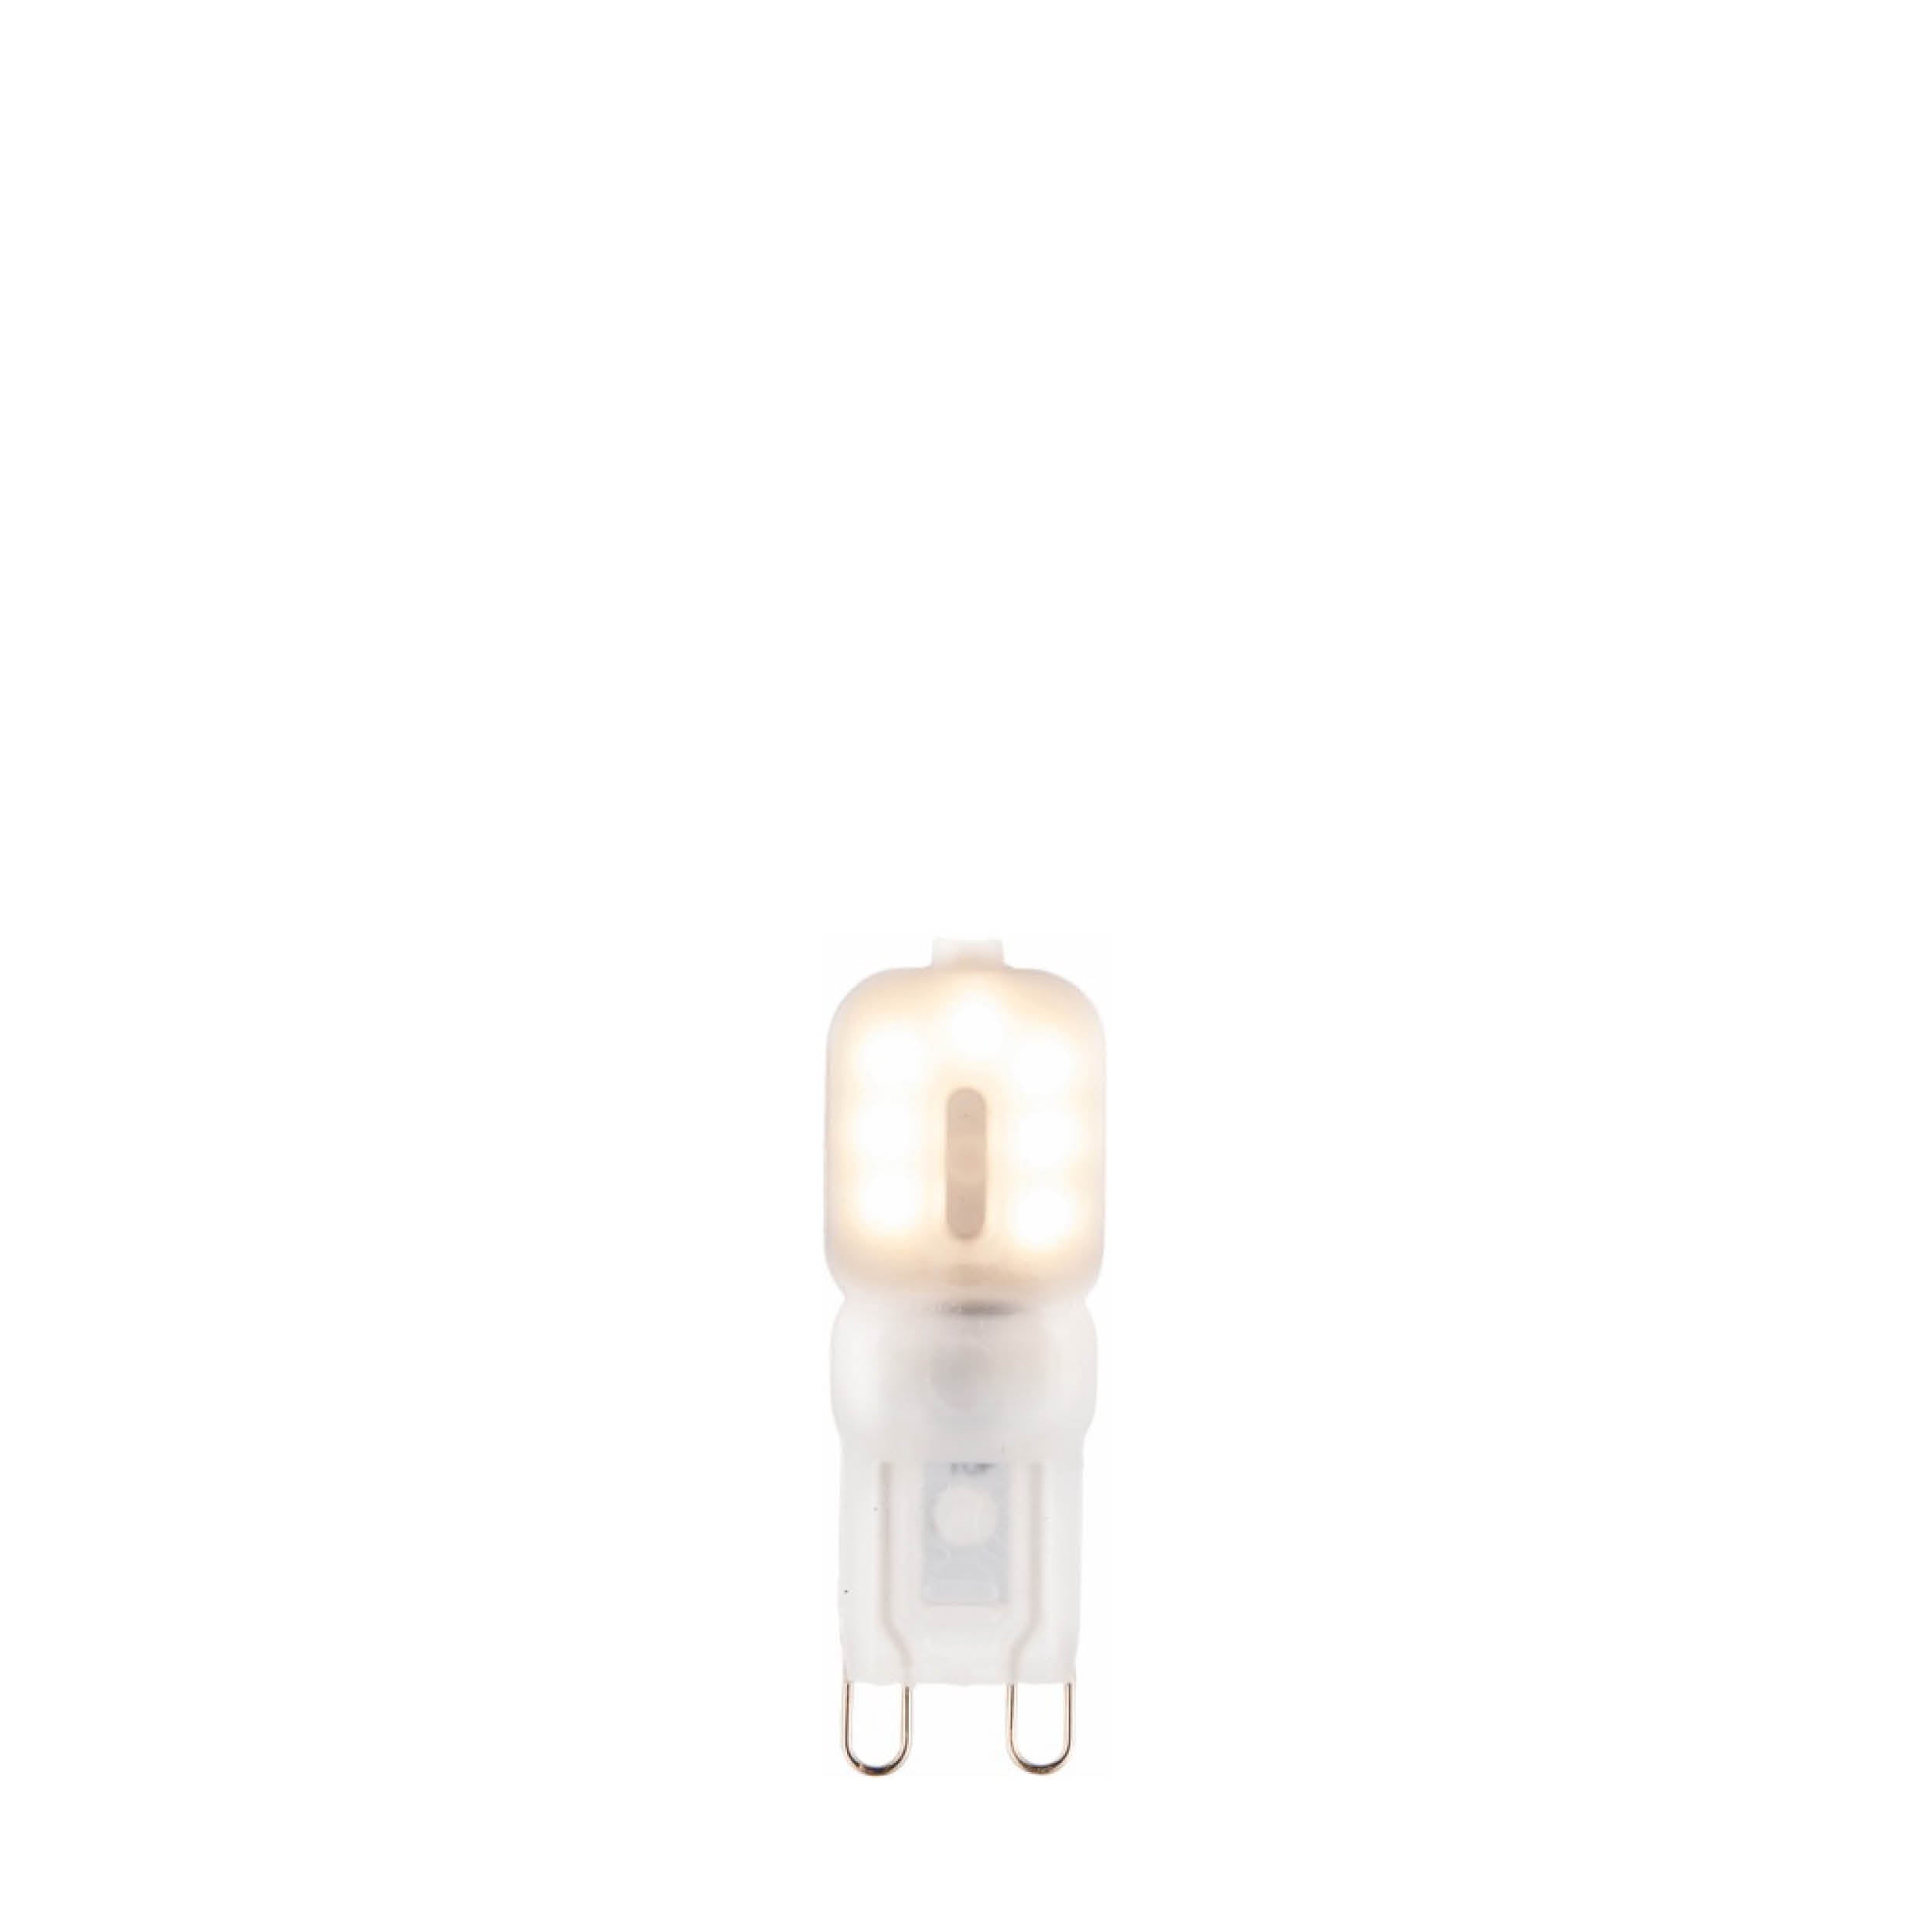 G9 LED bulb capsule. Warm White 2000K 2W 200lm. Non-Dimmable